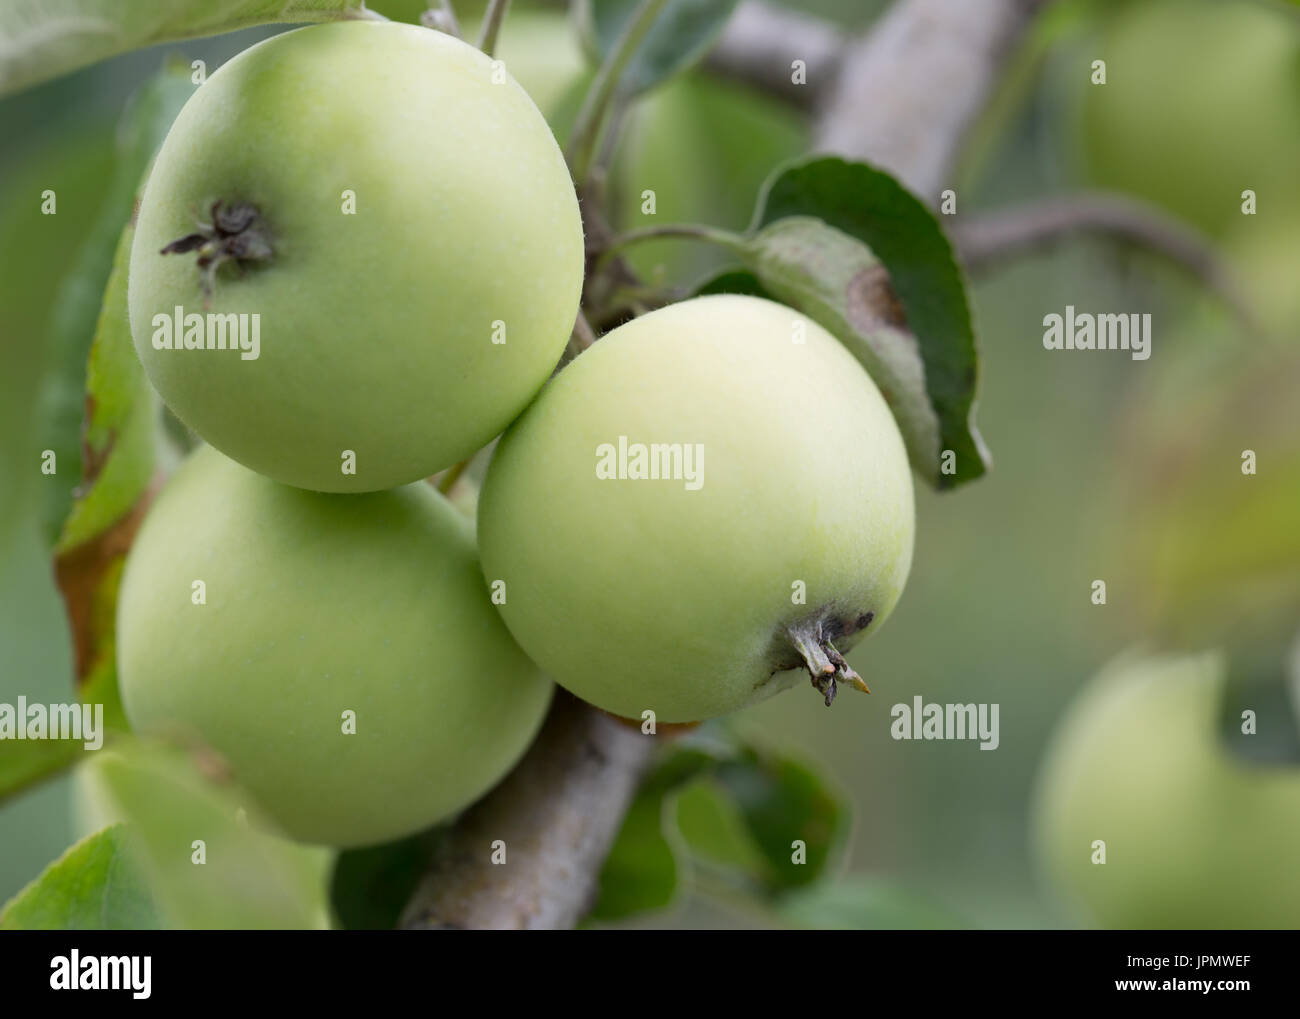 close up of green apples on a tree. Stock Photo